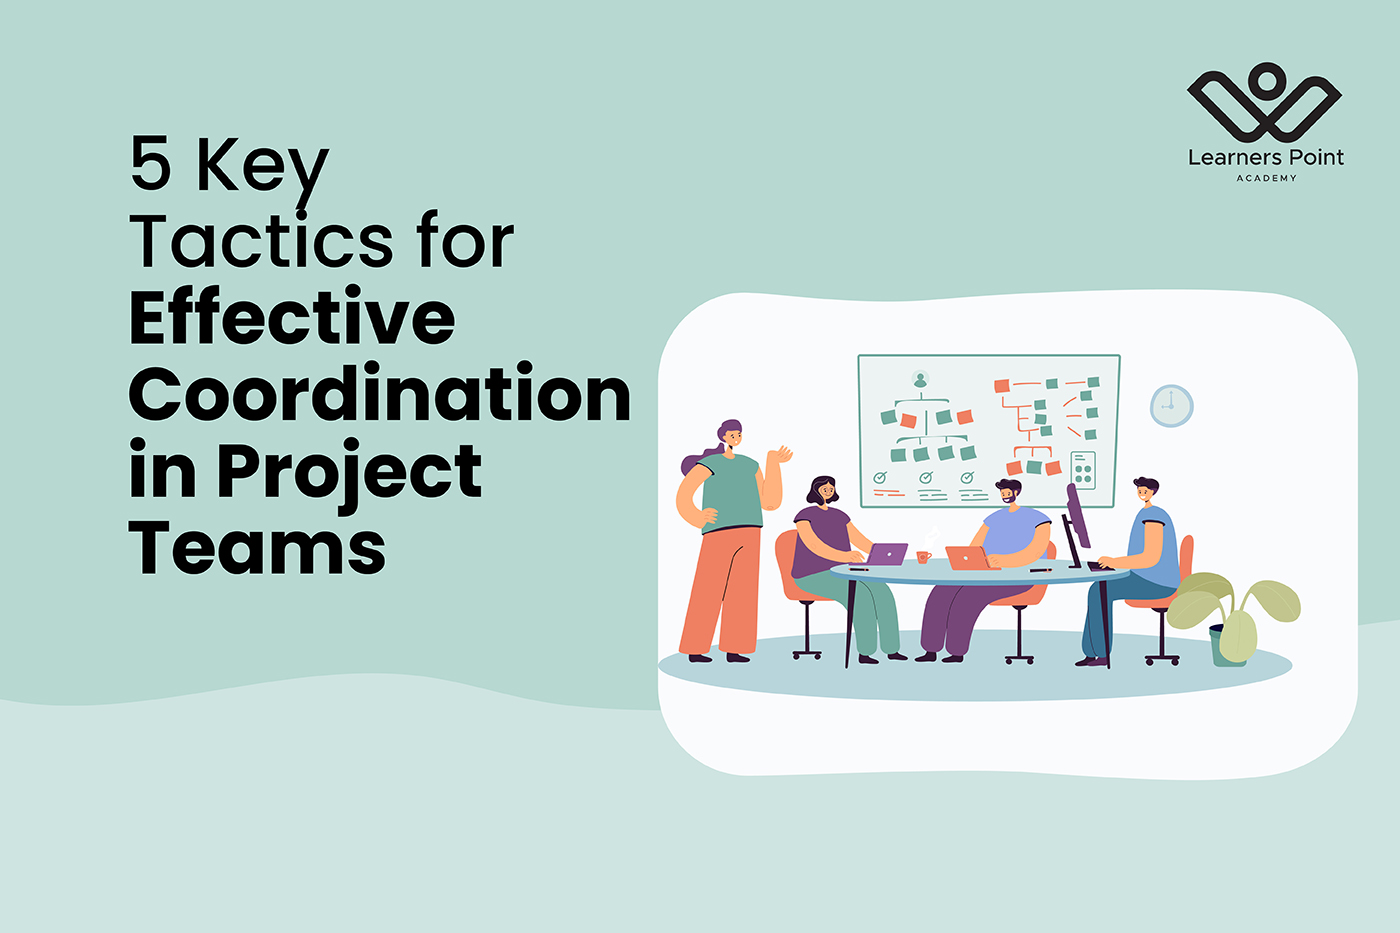 5 Key Tactics for Effective Coordination in Project Teams